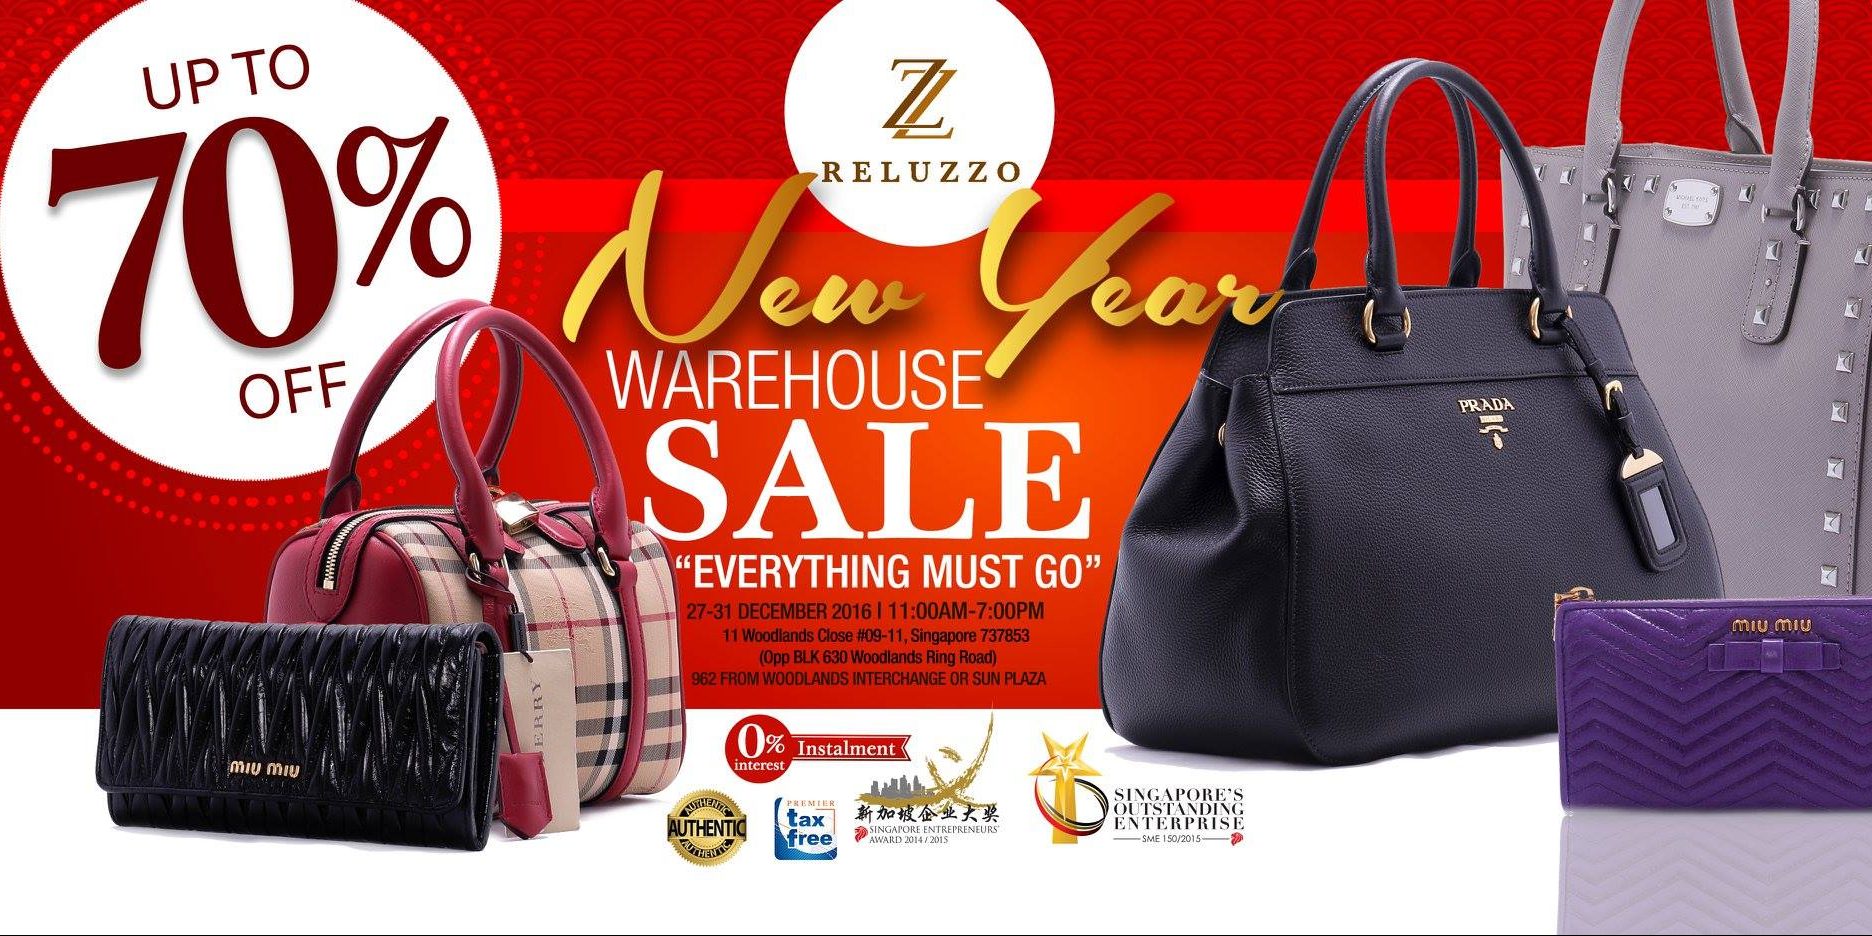 Reluzzo Singapore New Year Warehouse Sale Up to 70% Off Promotion 27 Dec 2016 – 3 Jan 2017